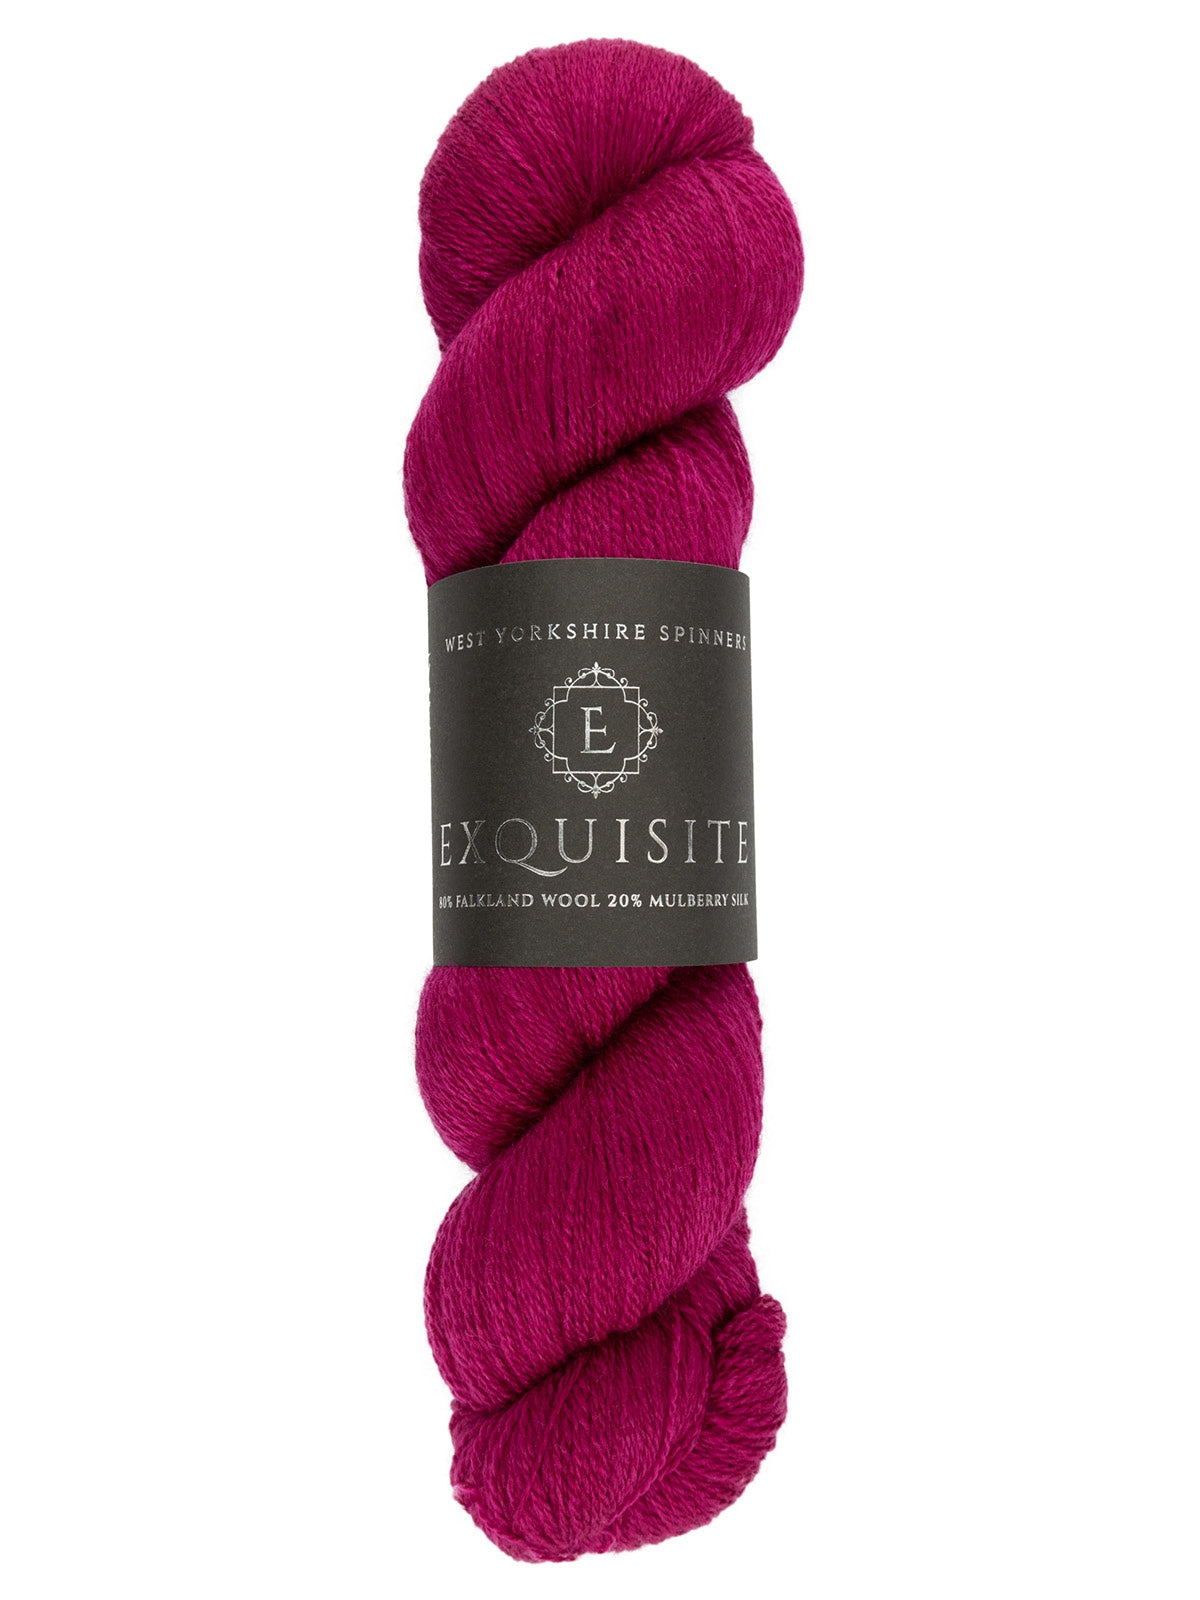 West Yorkshire Spinners Exquiste Lace color pink